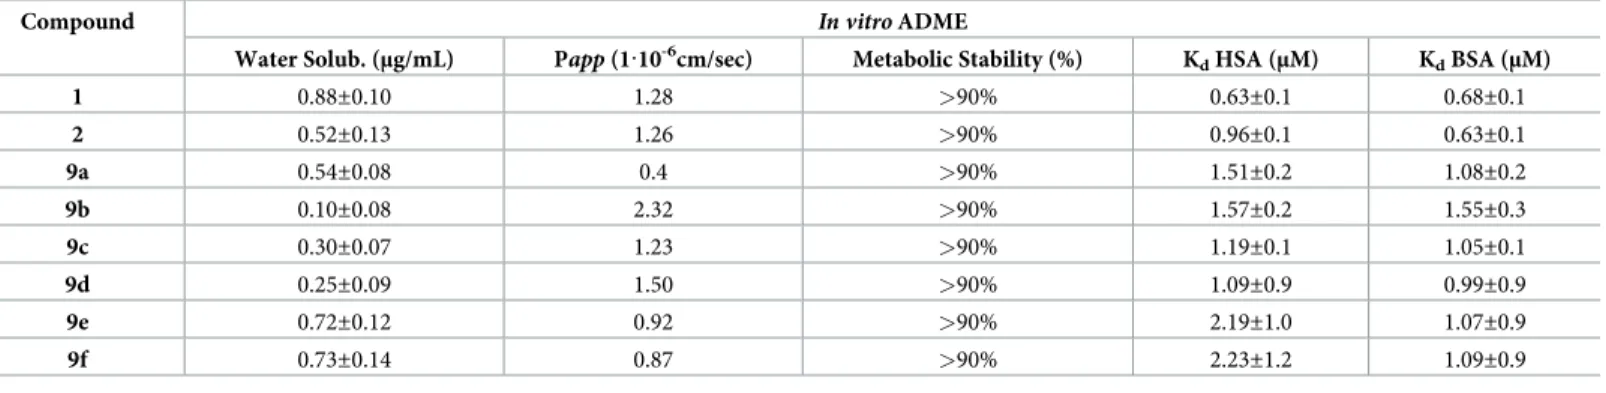 Table 4. Results of in vitro ADME analysis for selected rhodanine derivatives.